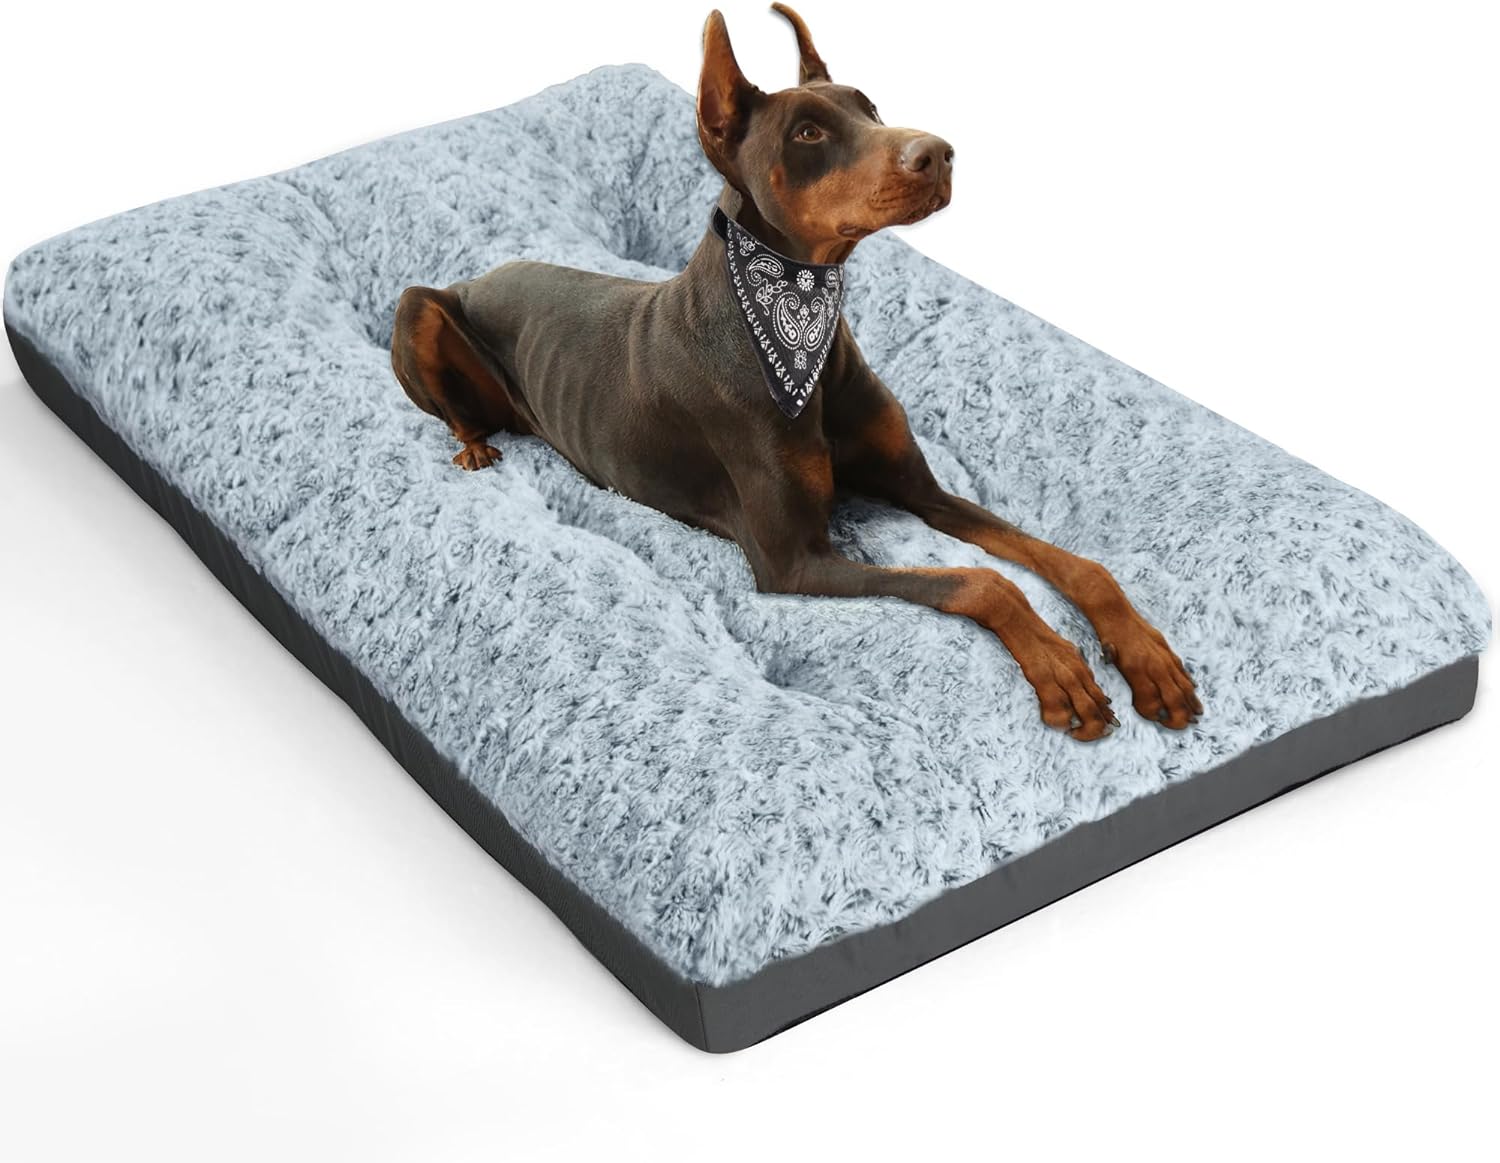 POCBLUE Deluxe Washable Dog Bed for Large Dogs Dog Crate Mat 36 Inch Comfy Fluffy Kennel Pad Anti-Slip for Dogs Up to 70 lbs, 36 x 23, Grey